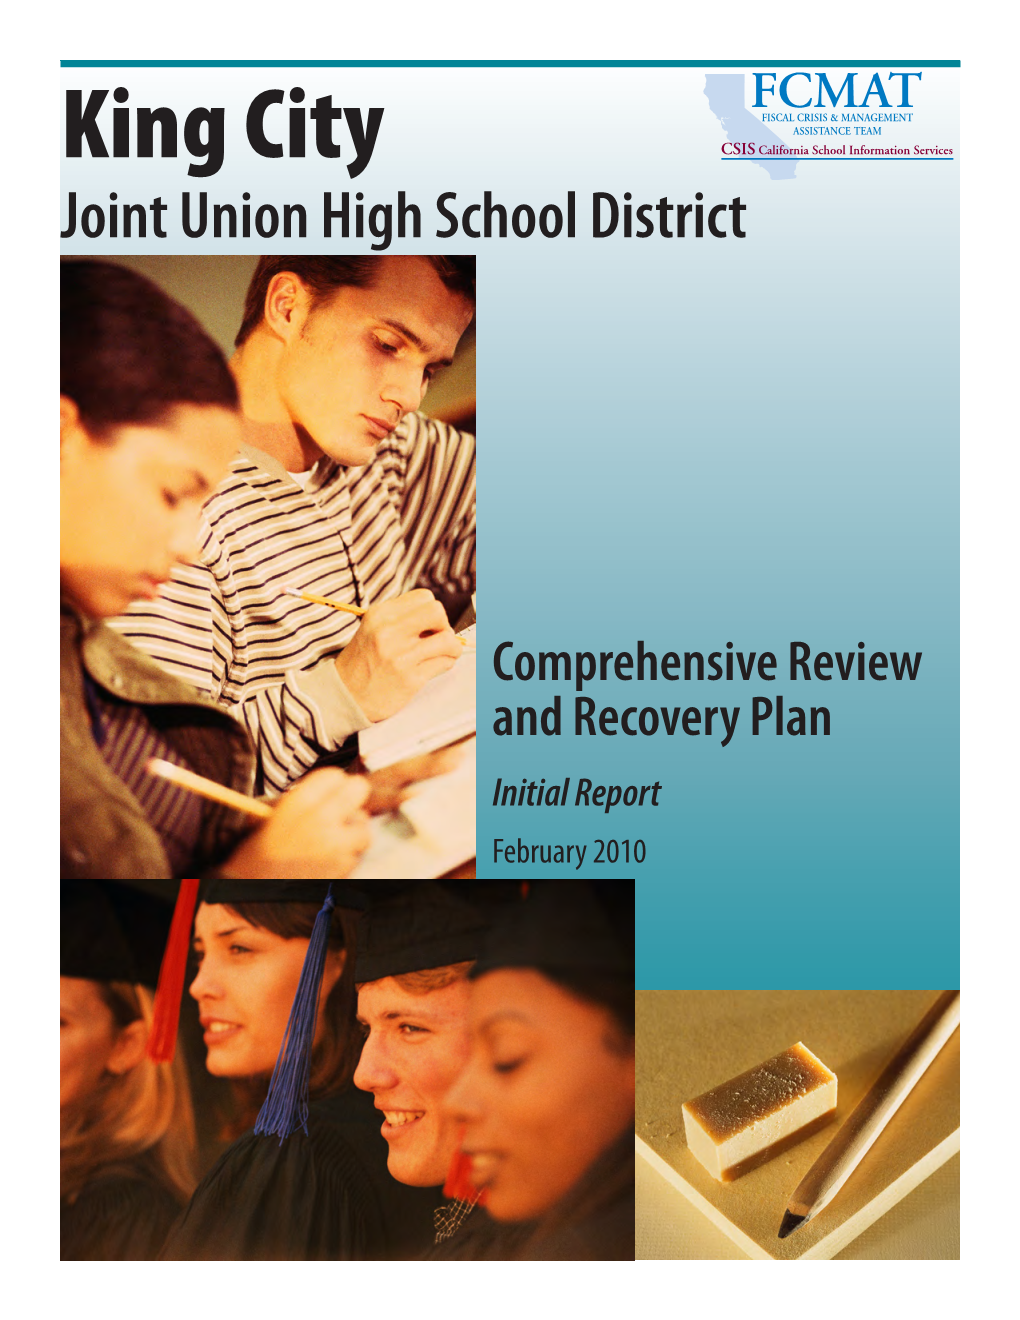 King City Joint Union High School District